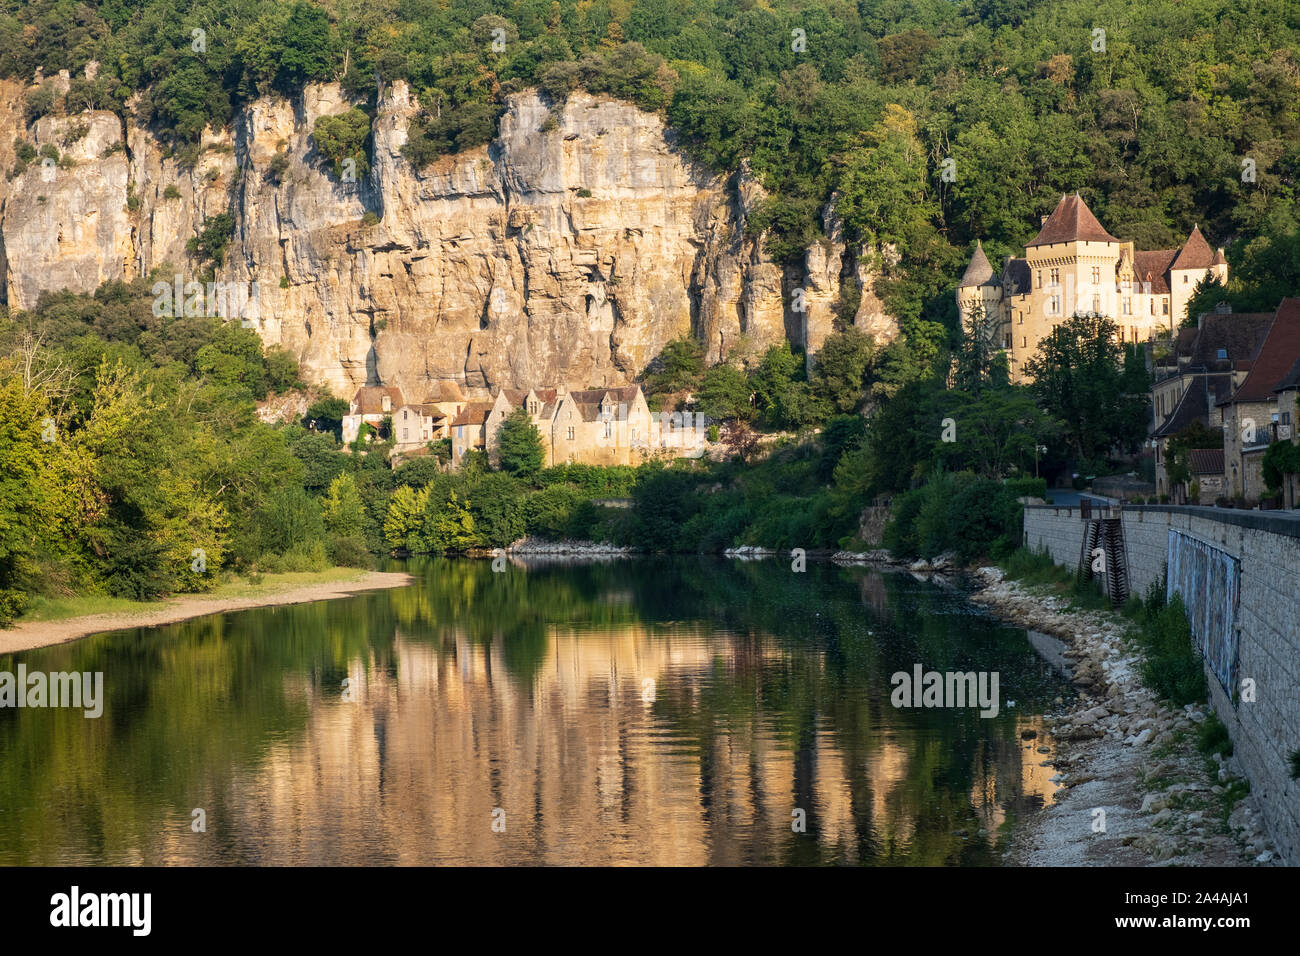 River dordogne, at La Roque Gageac, Perigord, France, tranquil river reflection of tufa cliffs and chateau Stock Photo